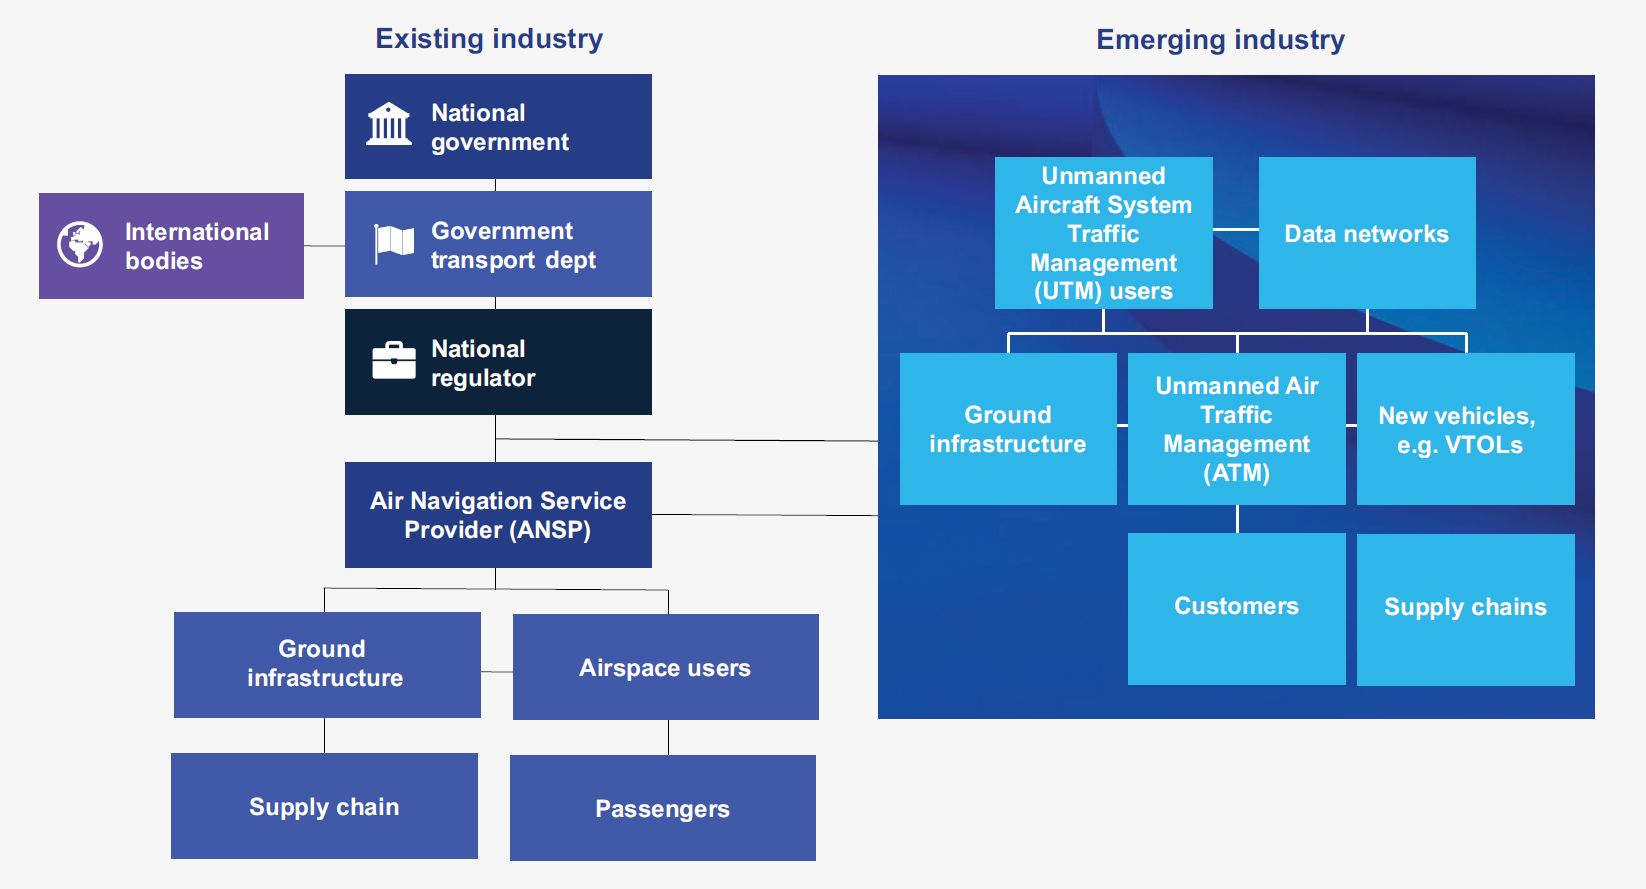 Merging existing and emerging aviation industries